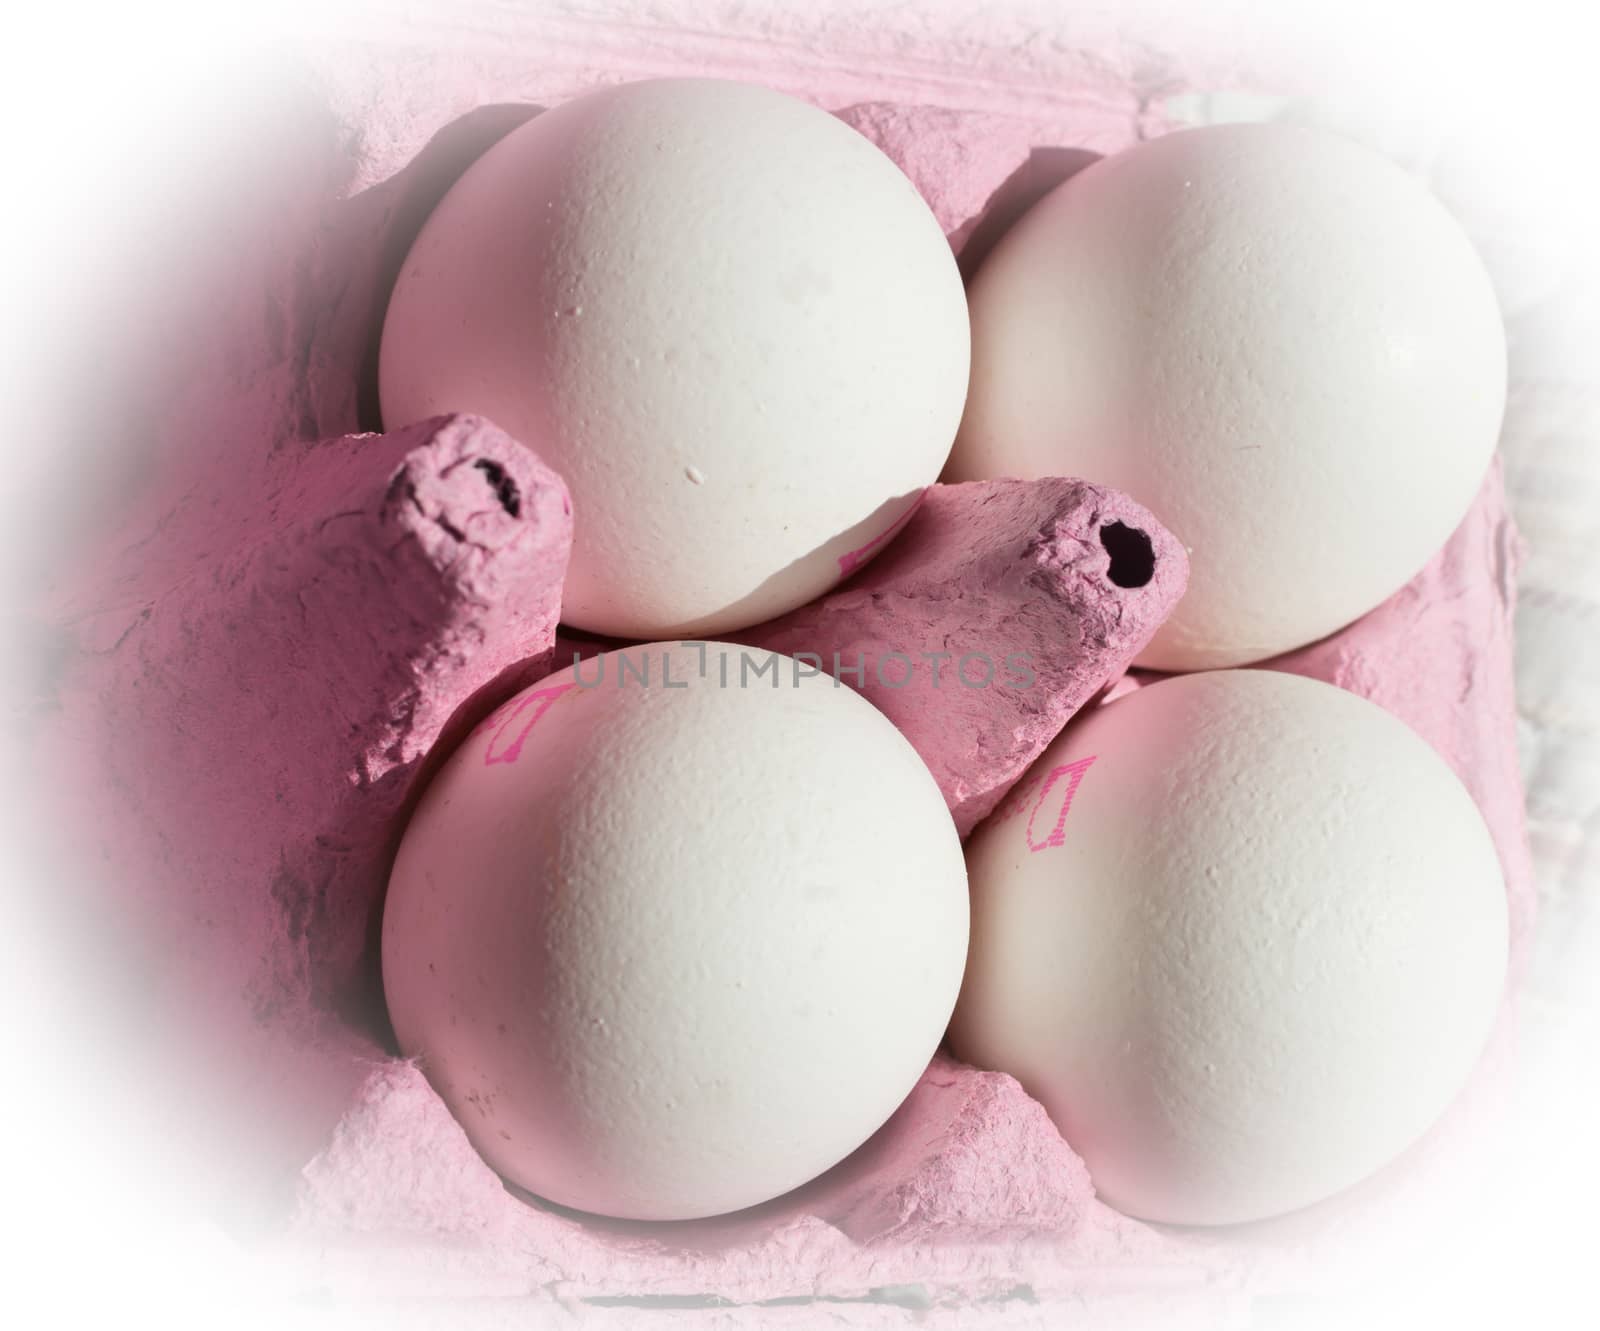 Four white eggs in pink carton fade out in white.